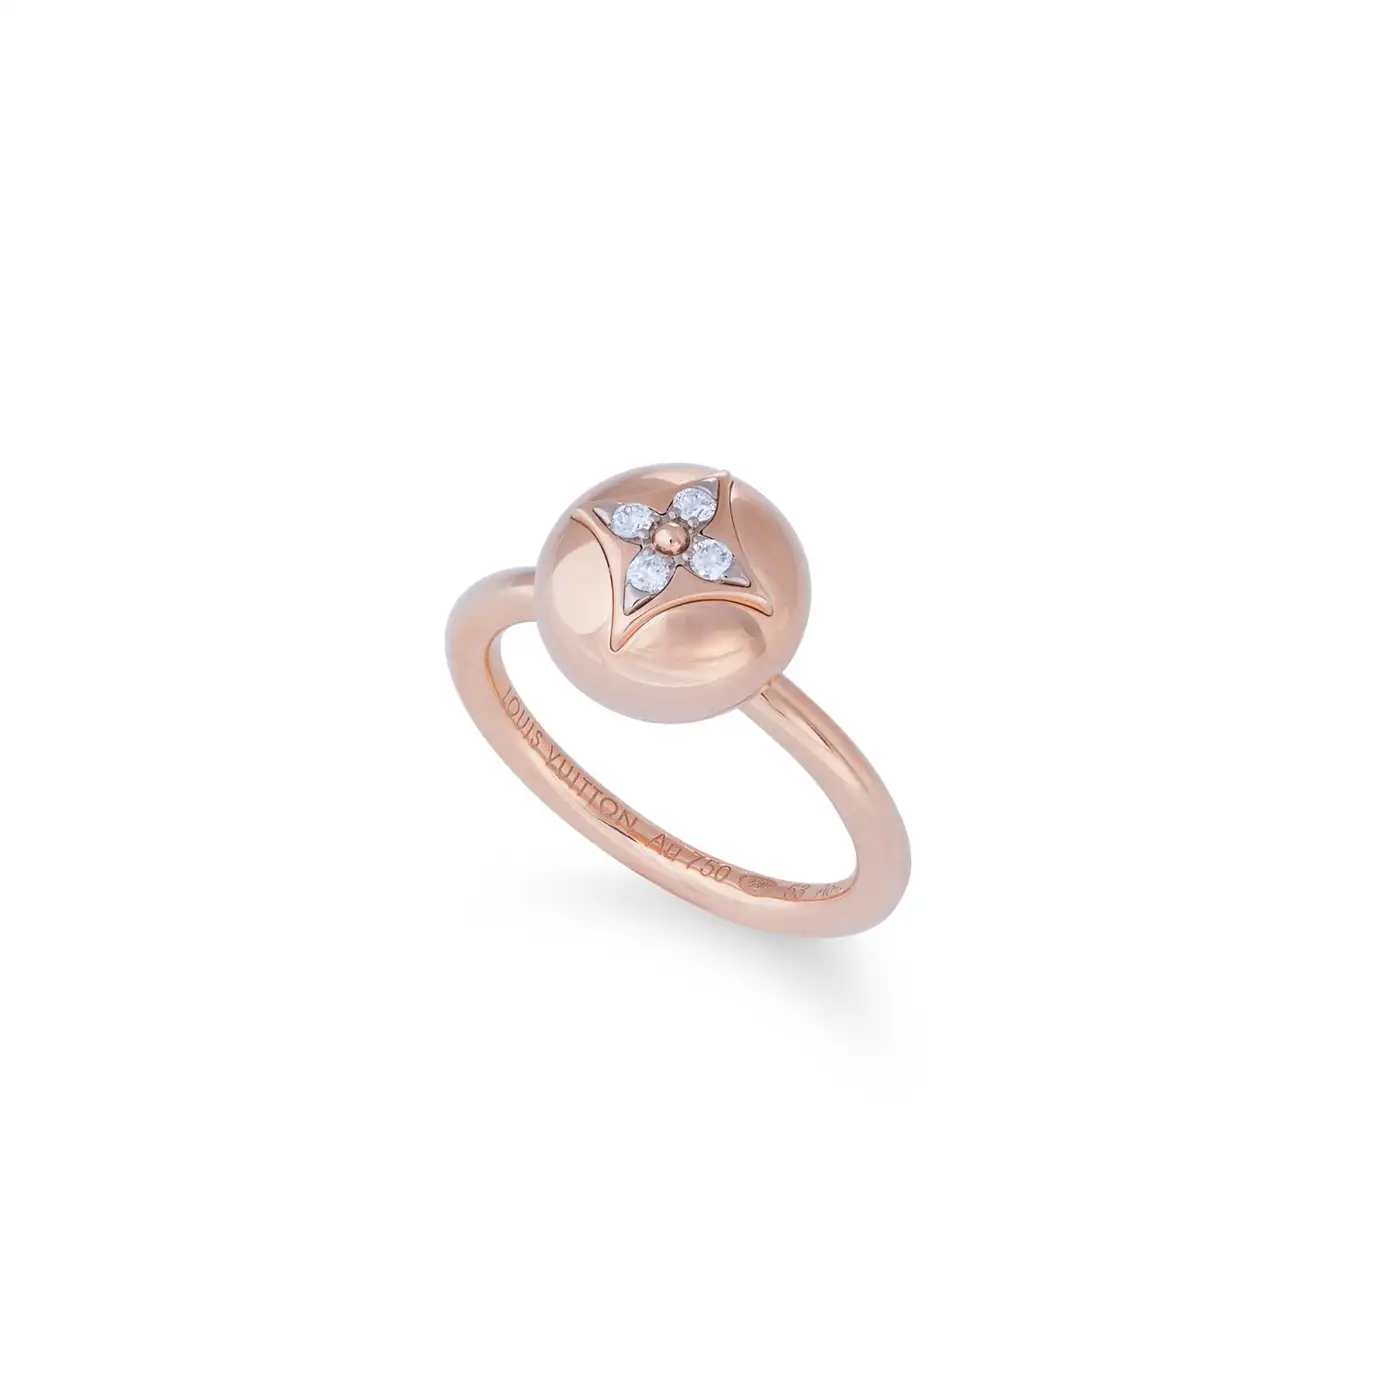 Louis-Vuitton-B-Blossom-Gold-and-Diamond-Ring-5.webp